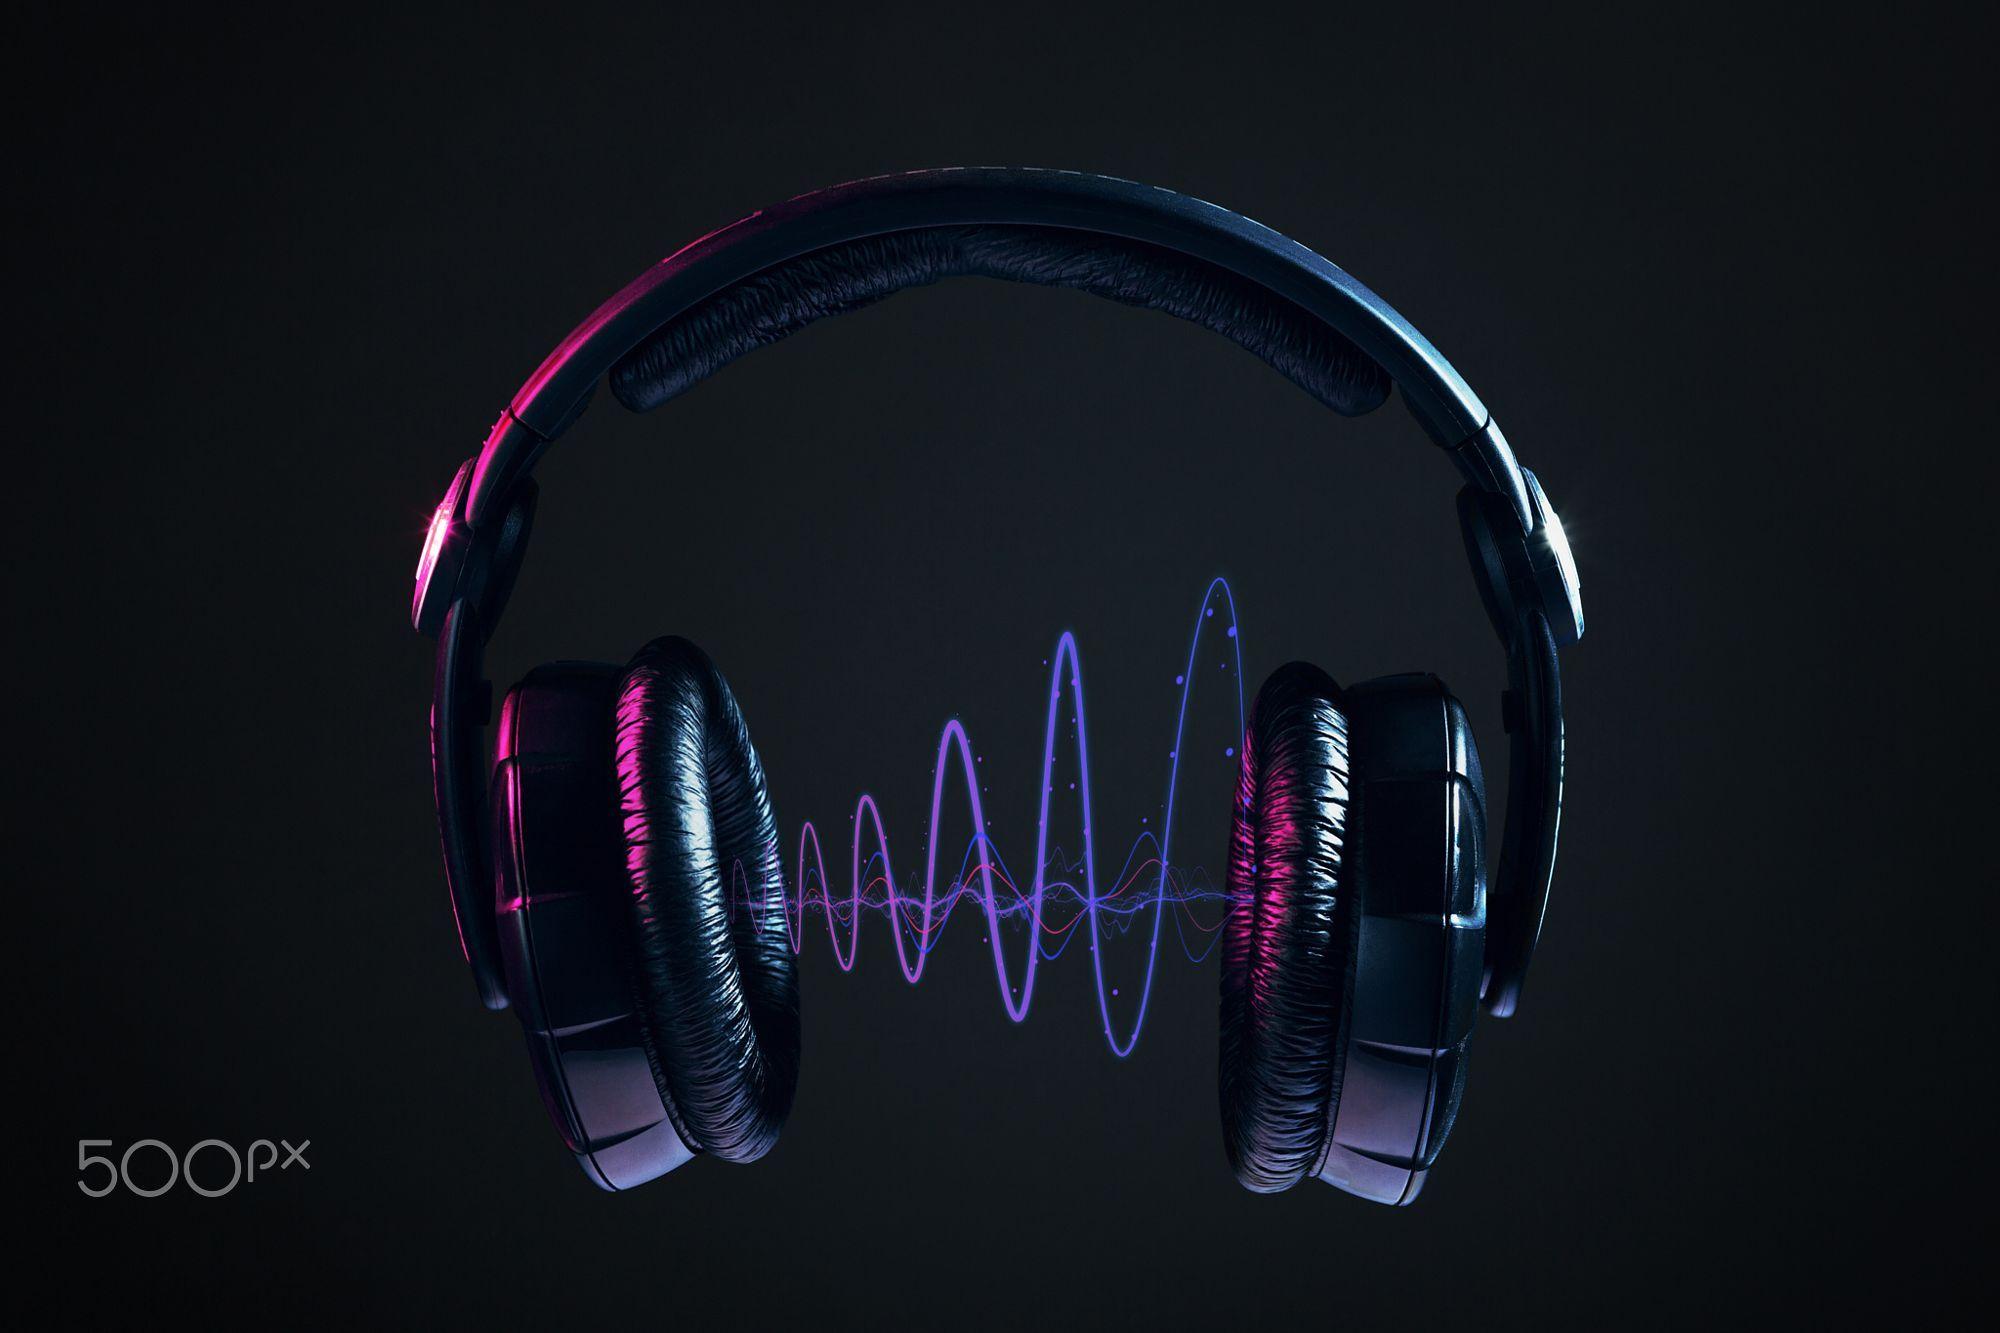 Dj Headphones and disco waves isolated on black background. Diesel